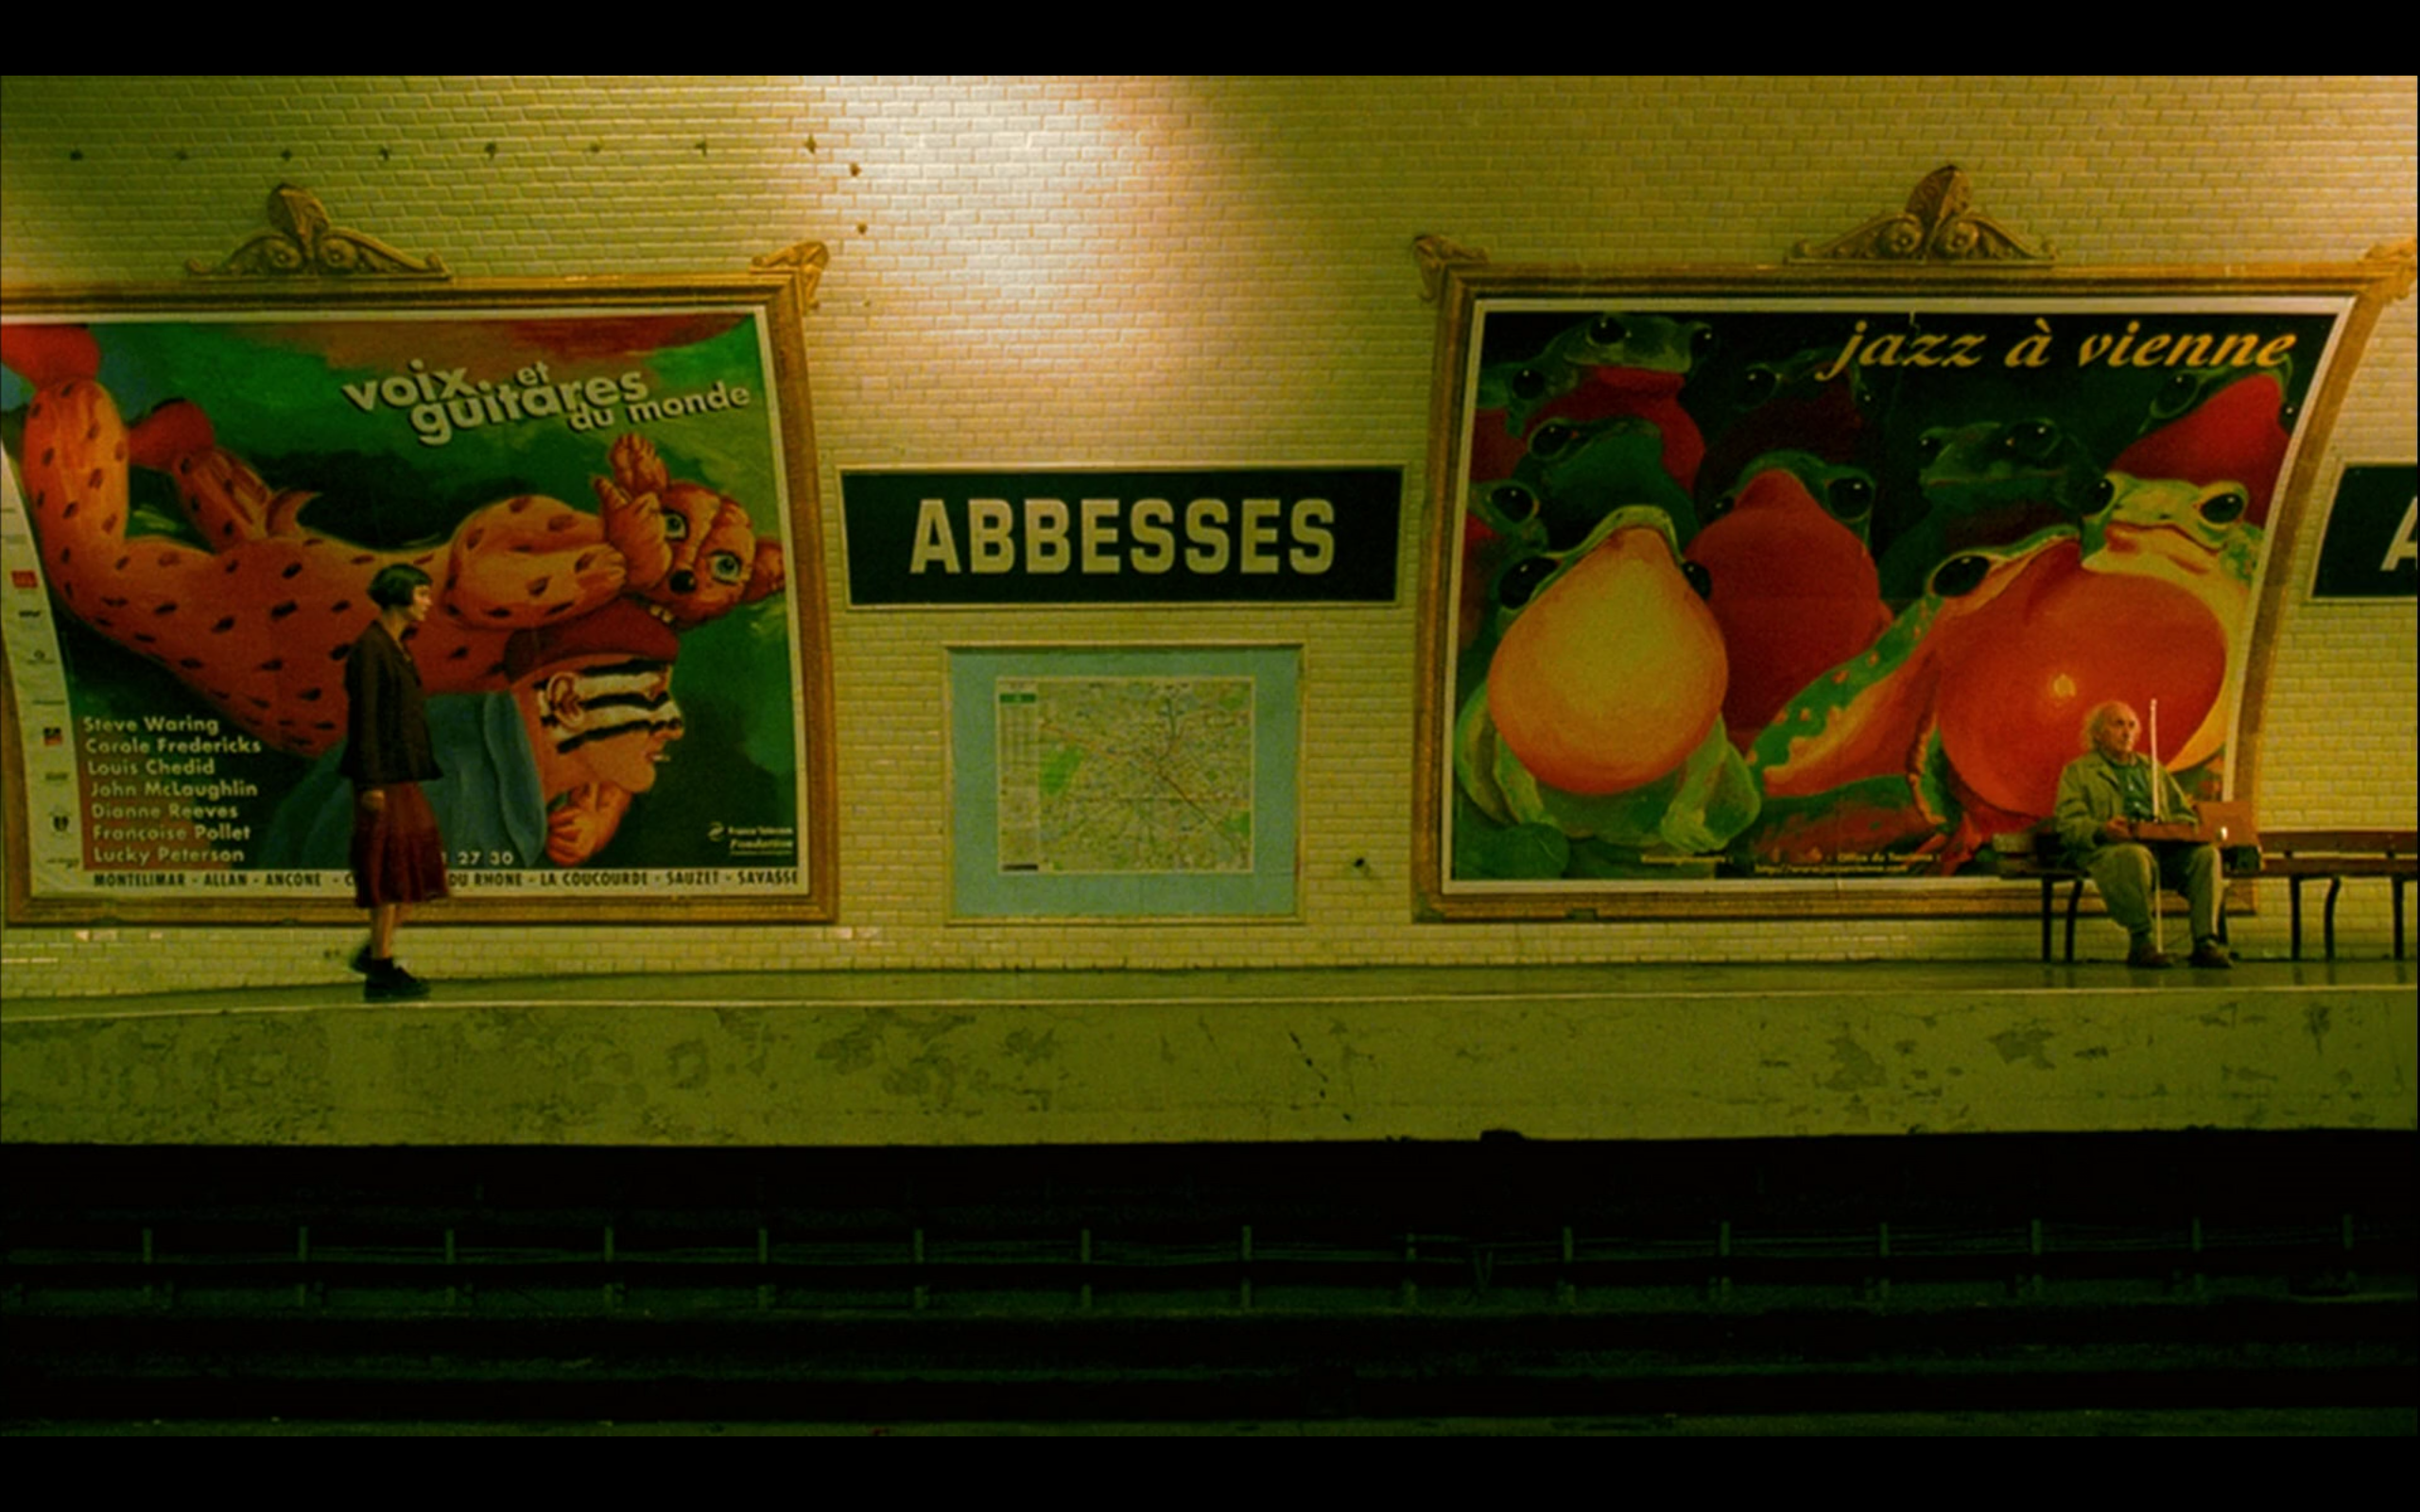 Amélie approaches the poor, blind man on the subway platform.